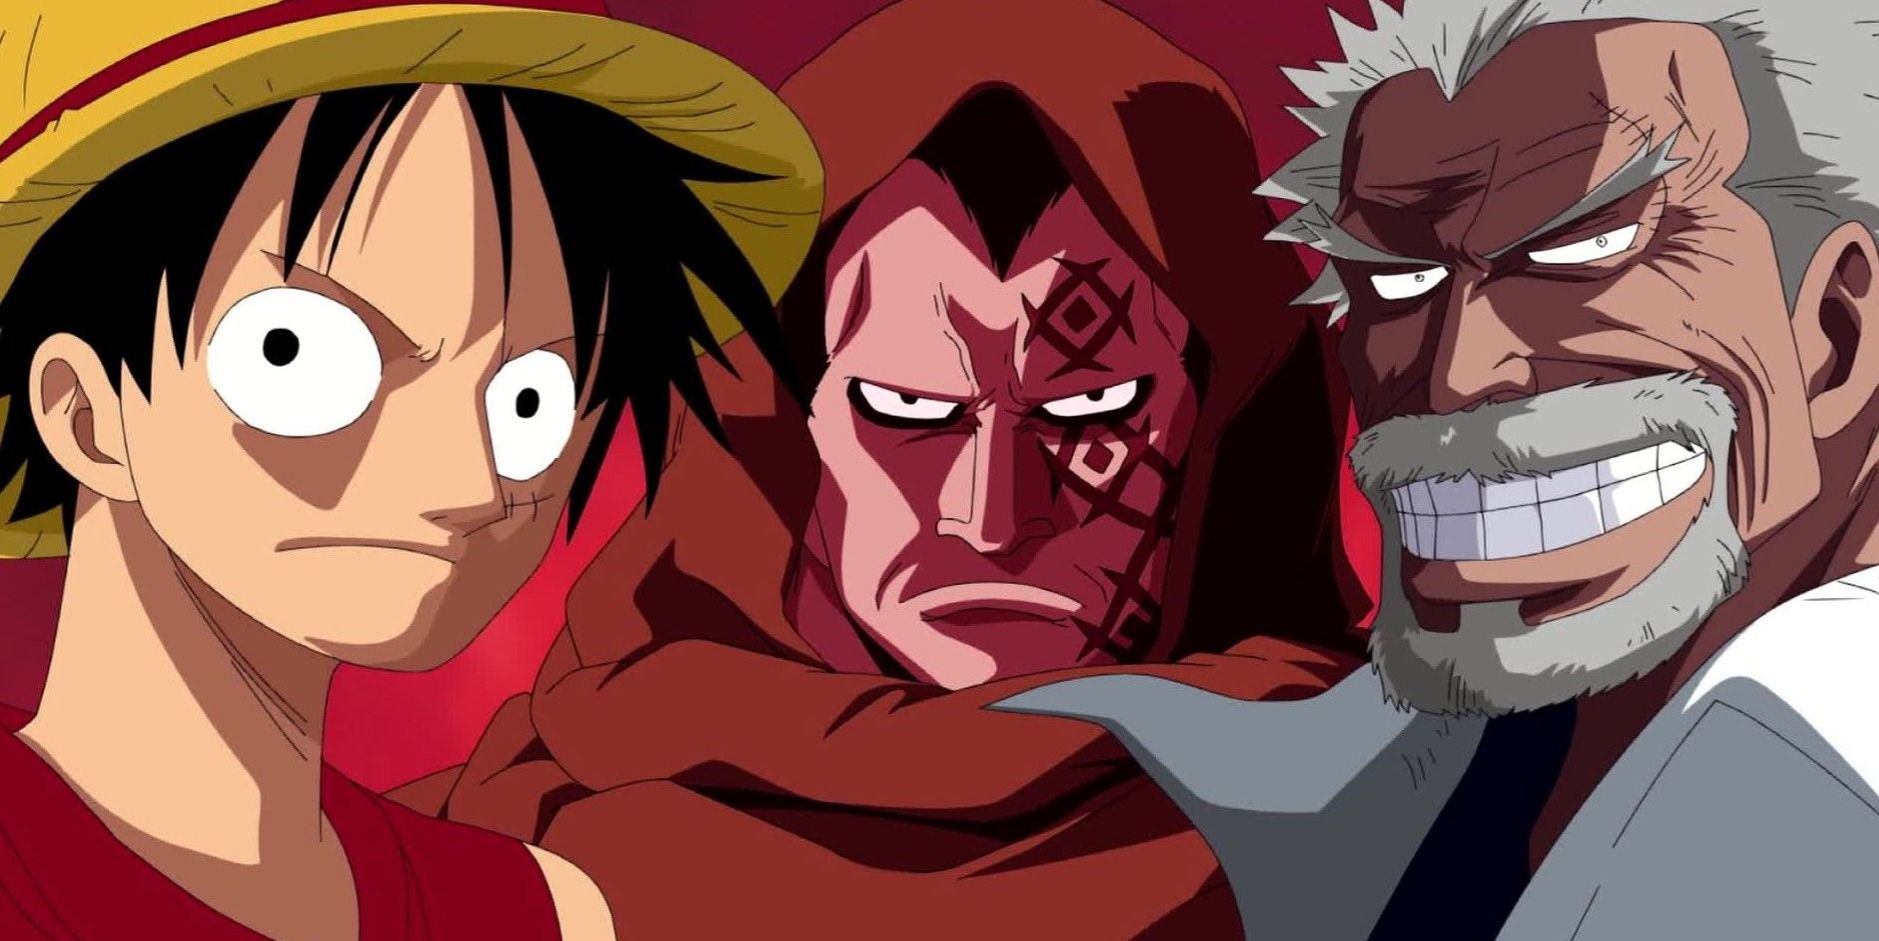 Luffy, Dragon and Garp from the Monkey Family